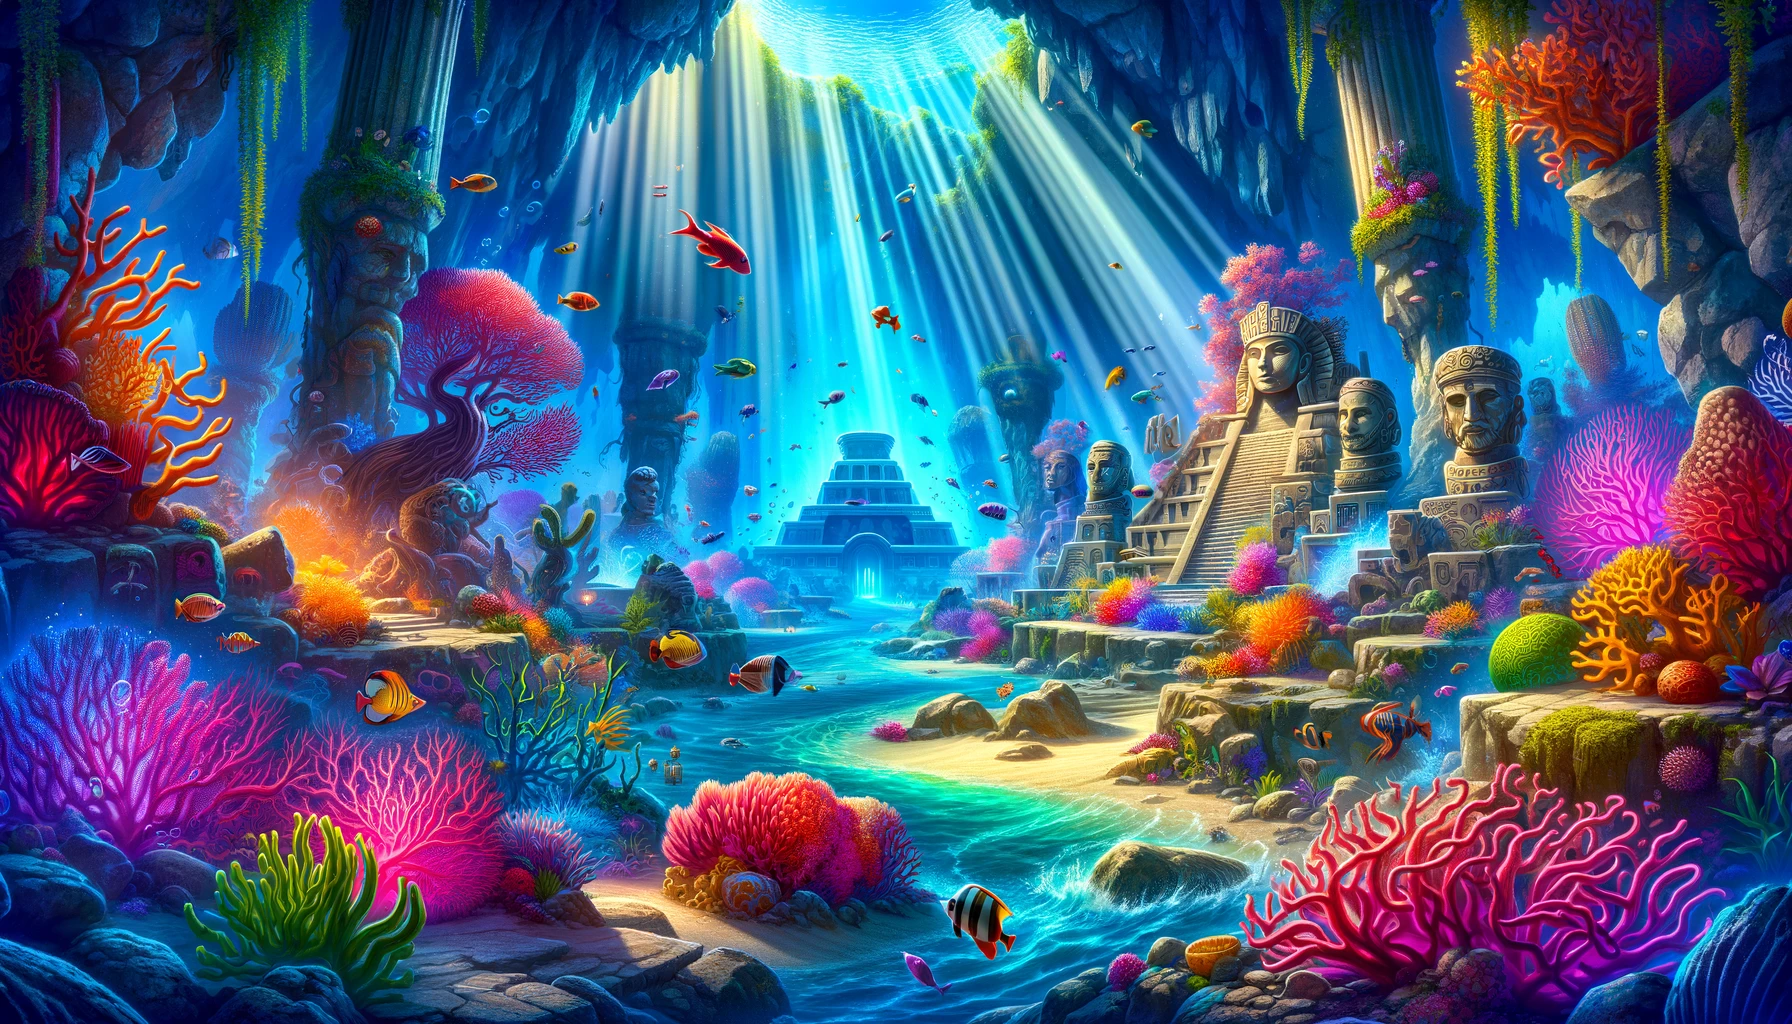 Enchanting underwater city with coral reefs, fish, and ancient statues in Cancun.